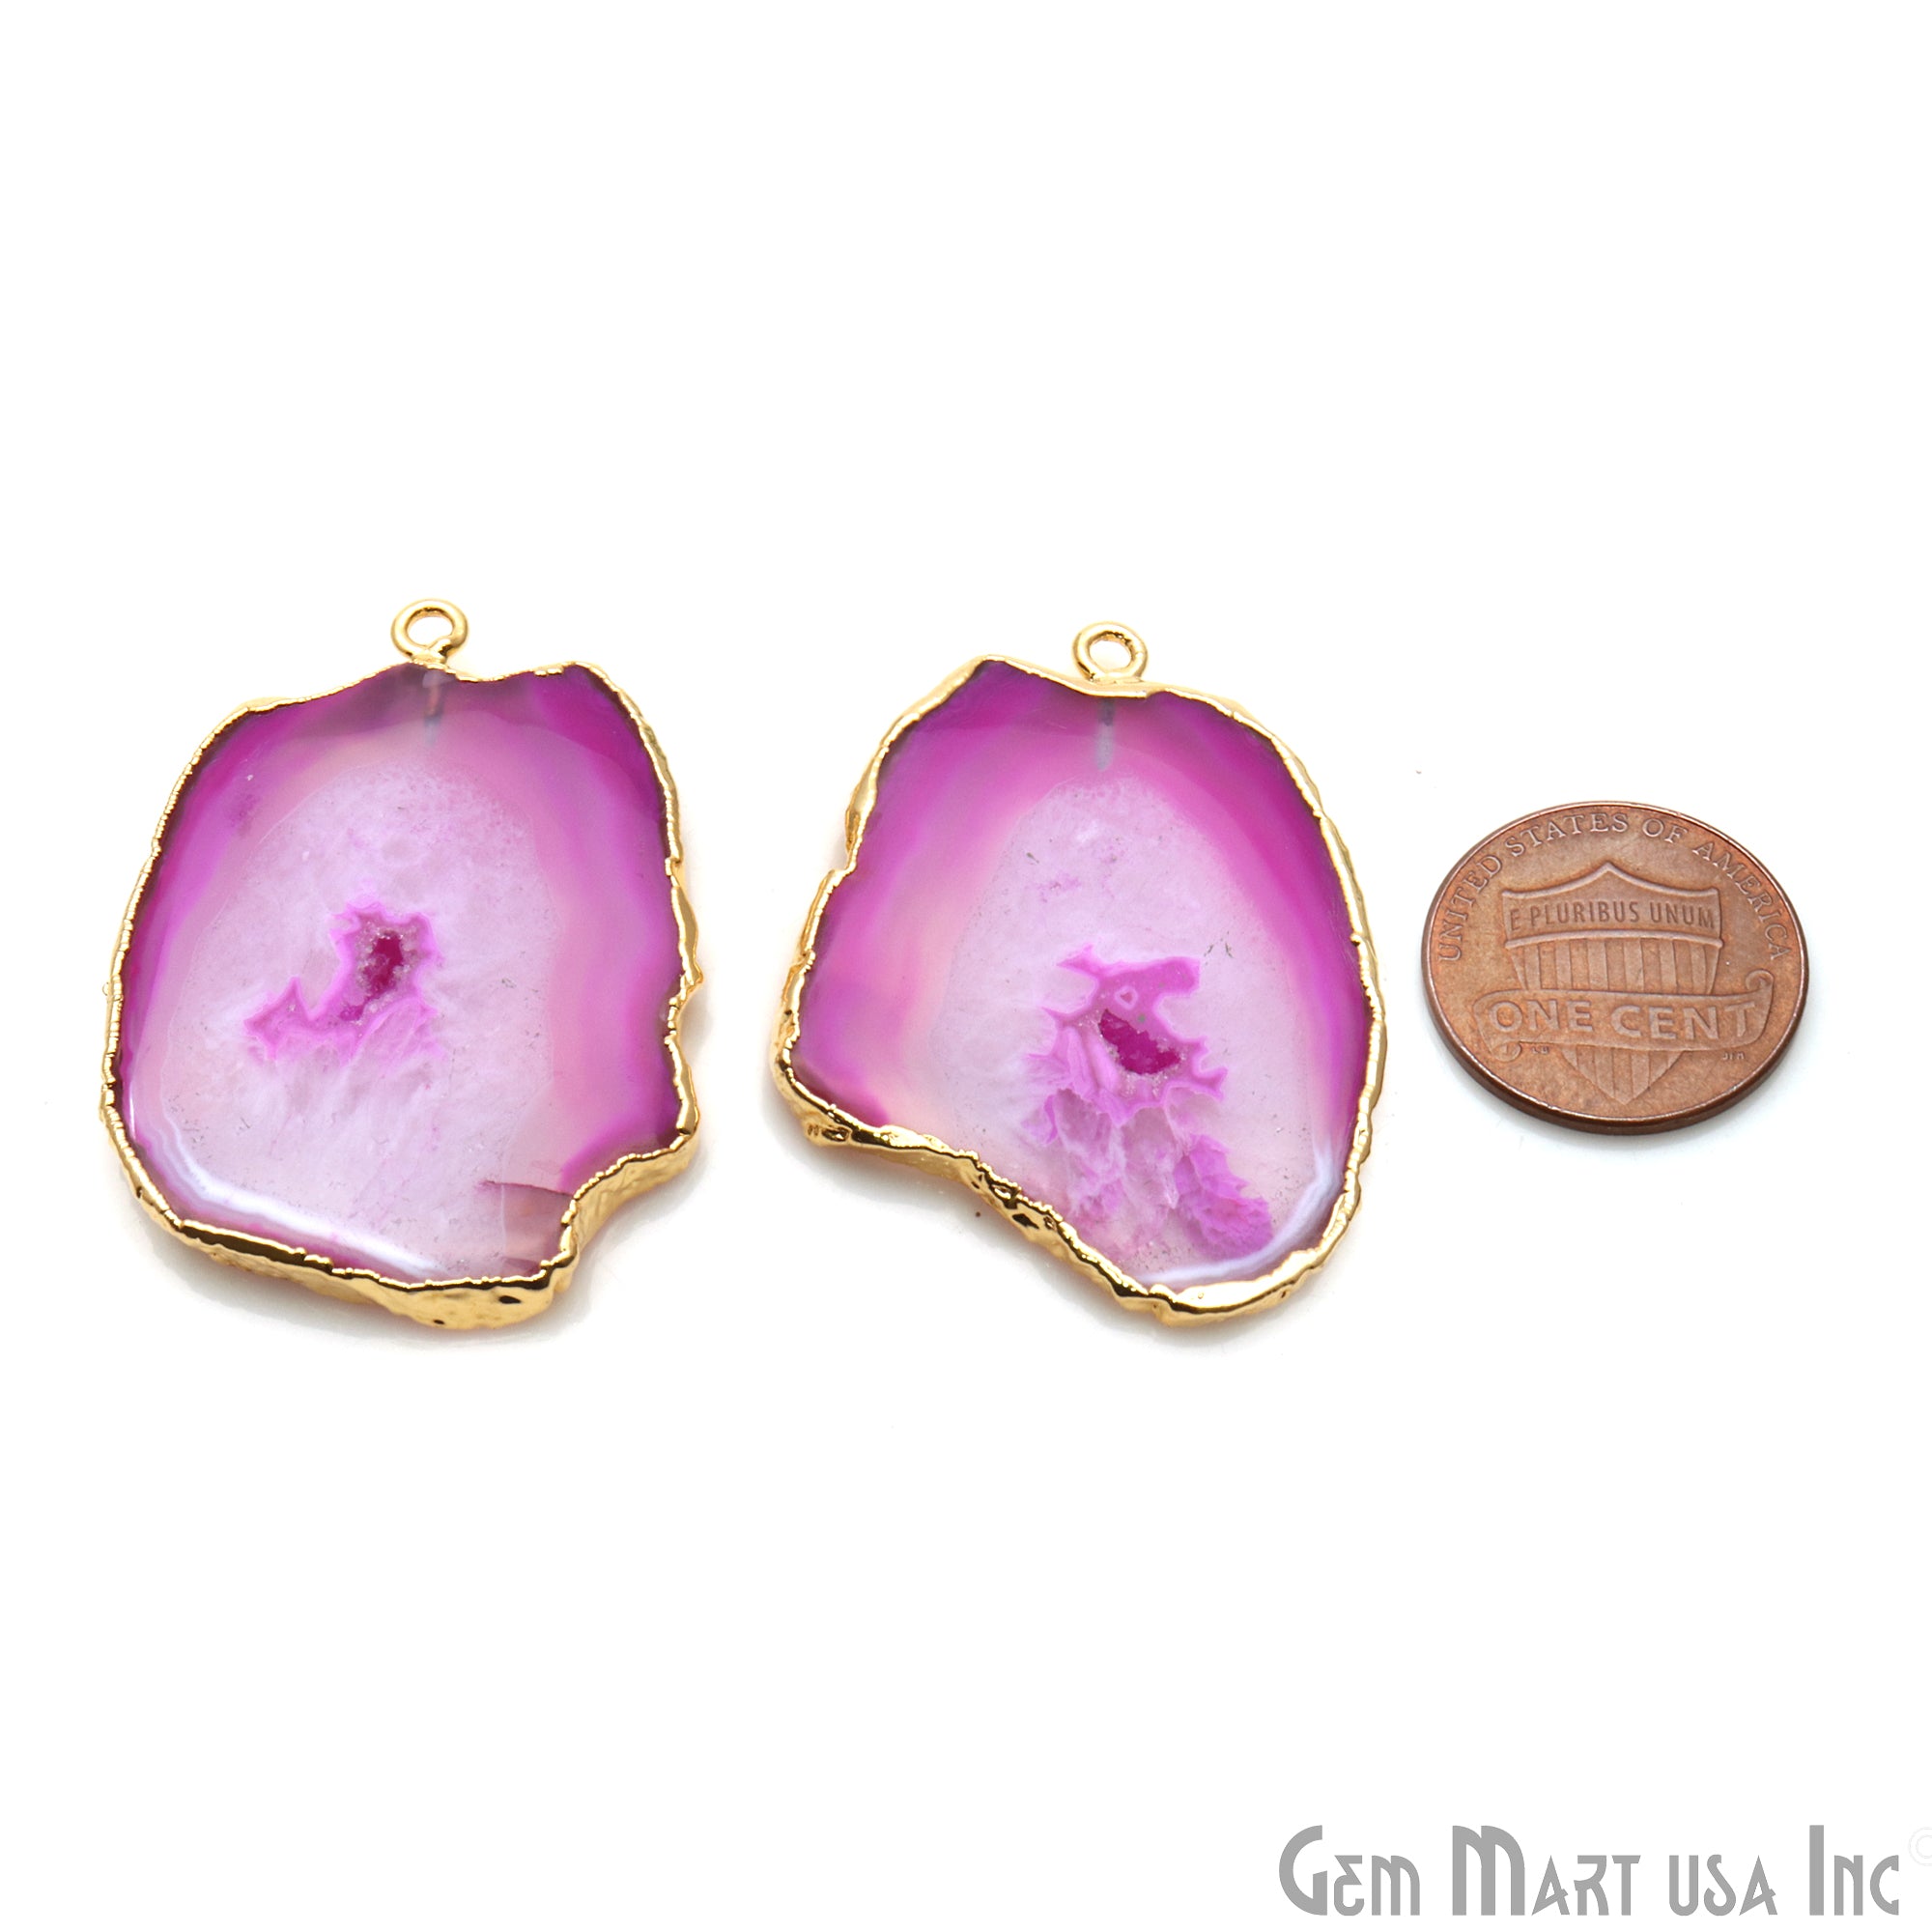 Agate Slice 40x29mm Organic Gold Electroplated Gemstone Earring Connector 1 Pair - GemMartUSA